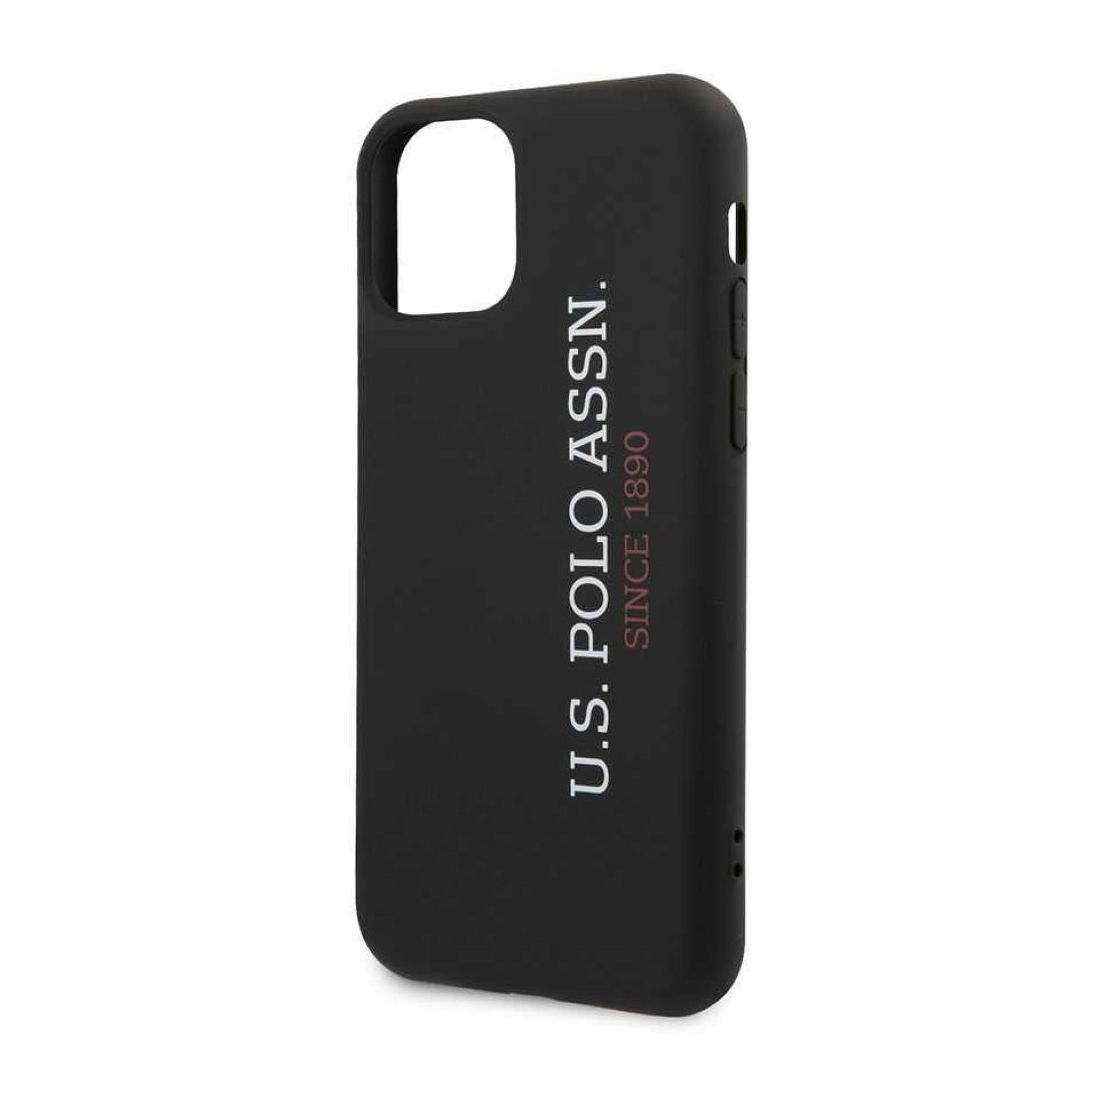 US Polo Assn Liquid Silicone Hard Case Vertical Logo Black for iPhone 12 Pro Max